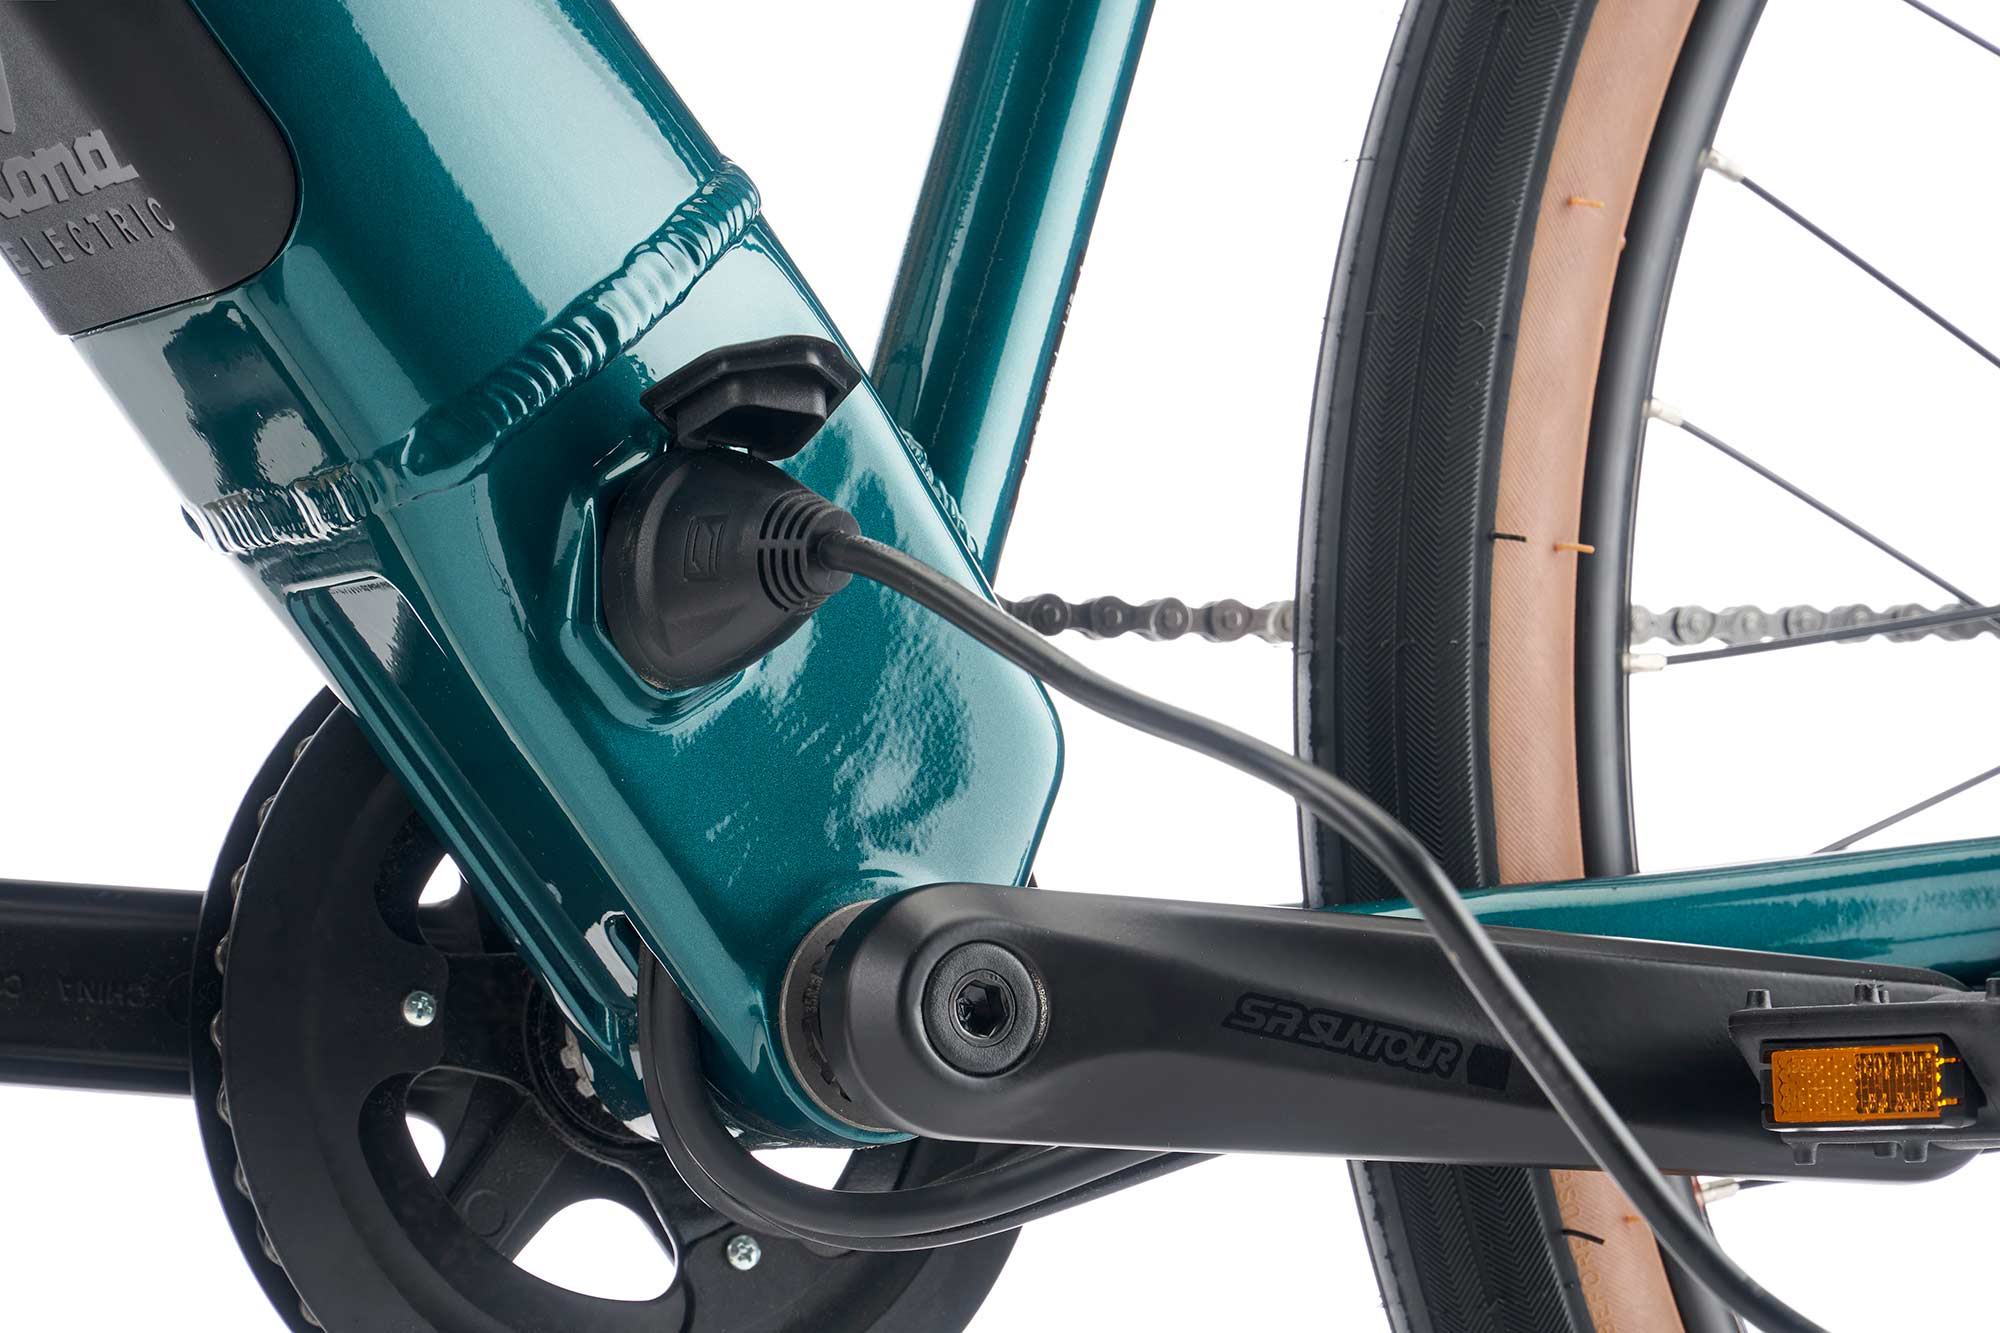 The 418Wh battery—common across all three ebikes—can be charged on or off the bike.